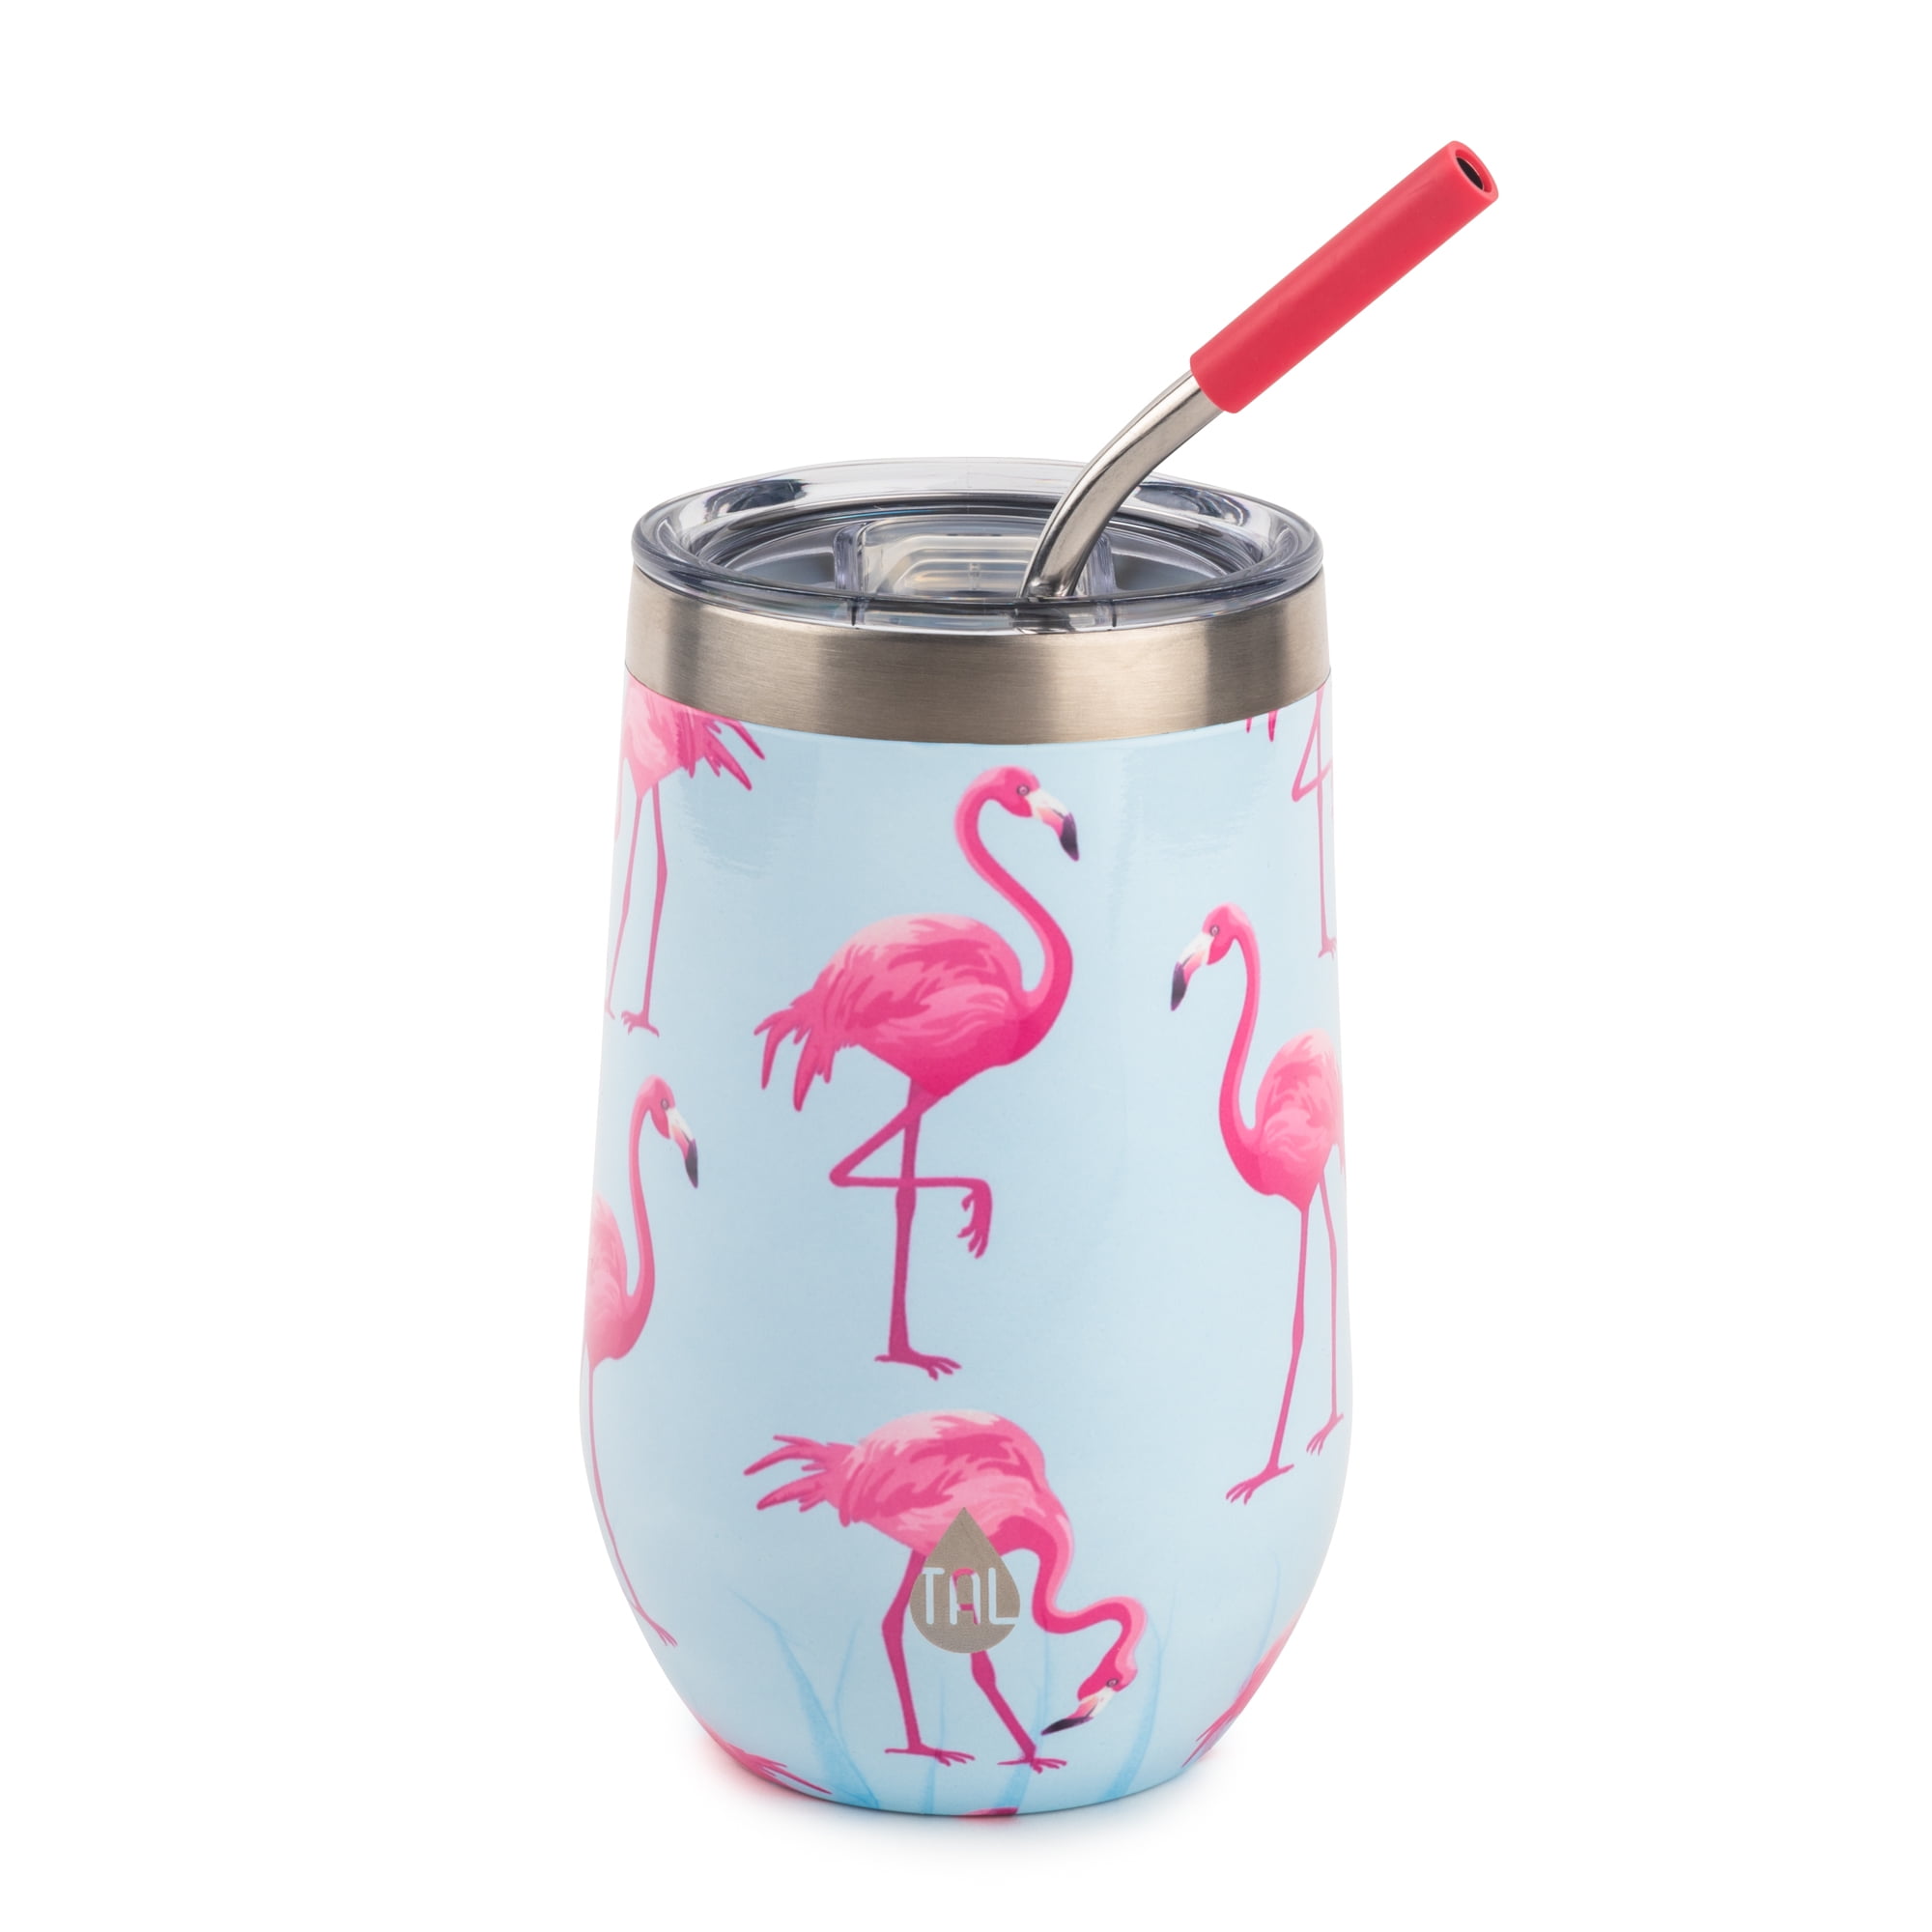 16oz. Insulated Stainless Steel Tumbler - The Salty Palm